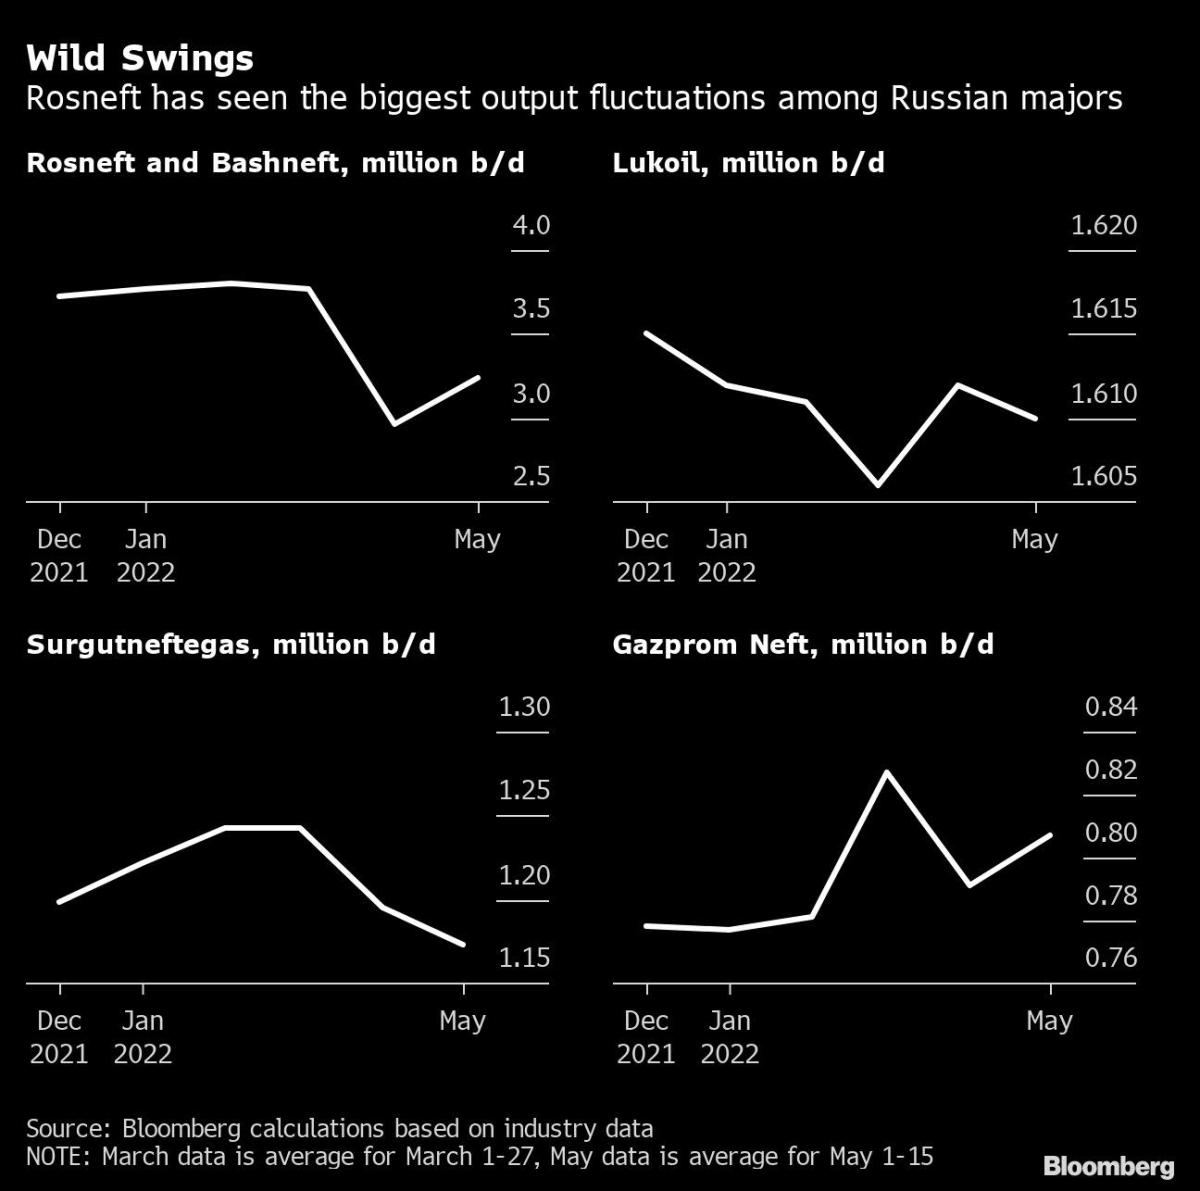 Putin's State Oil Champion Suffers Biggest Production Drop